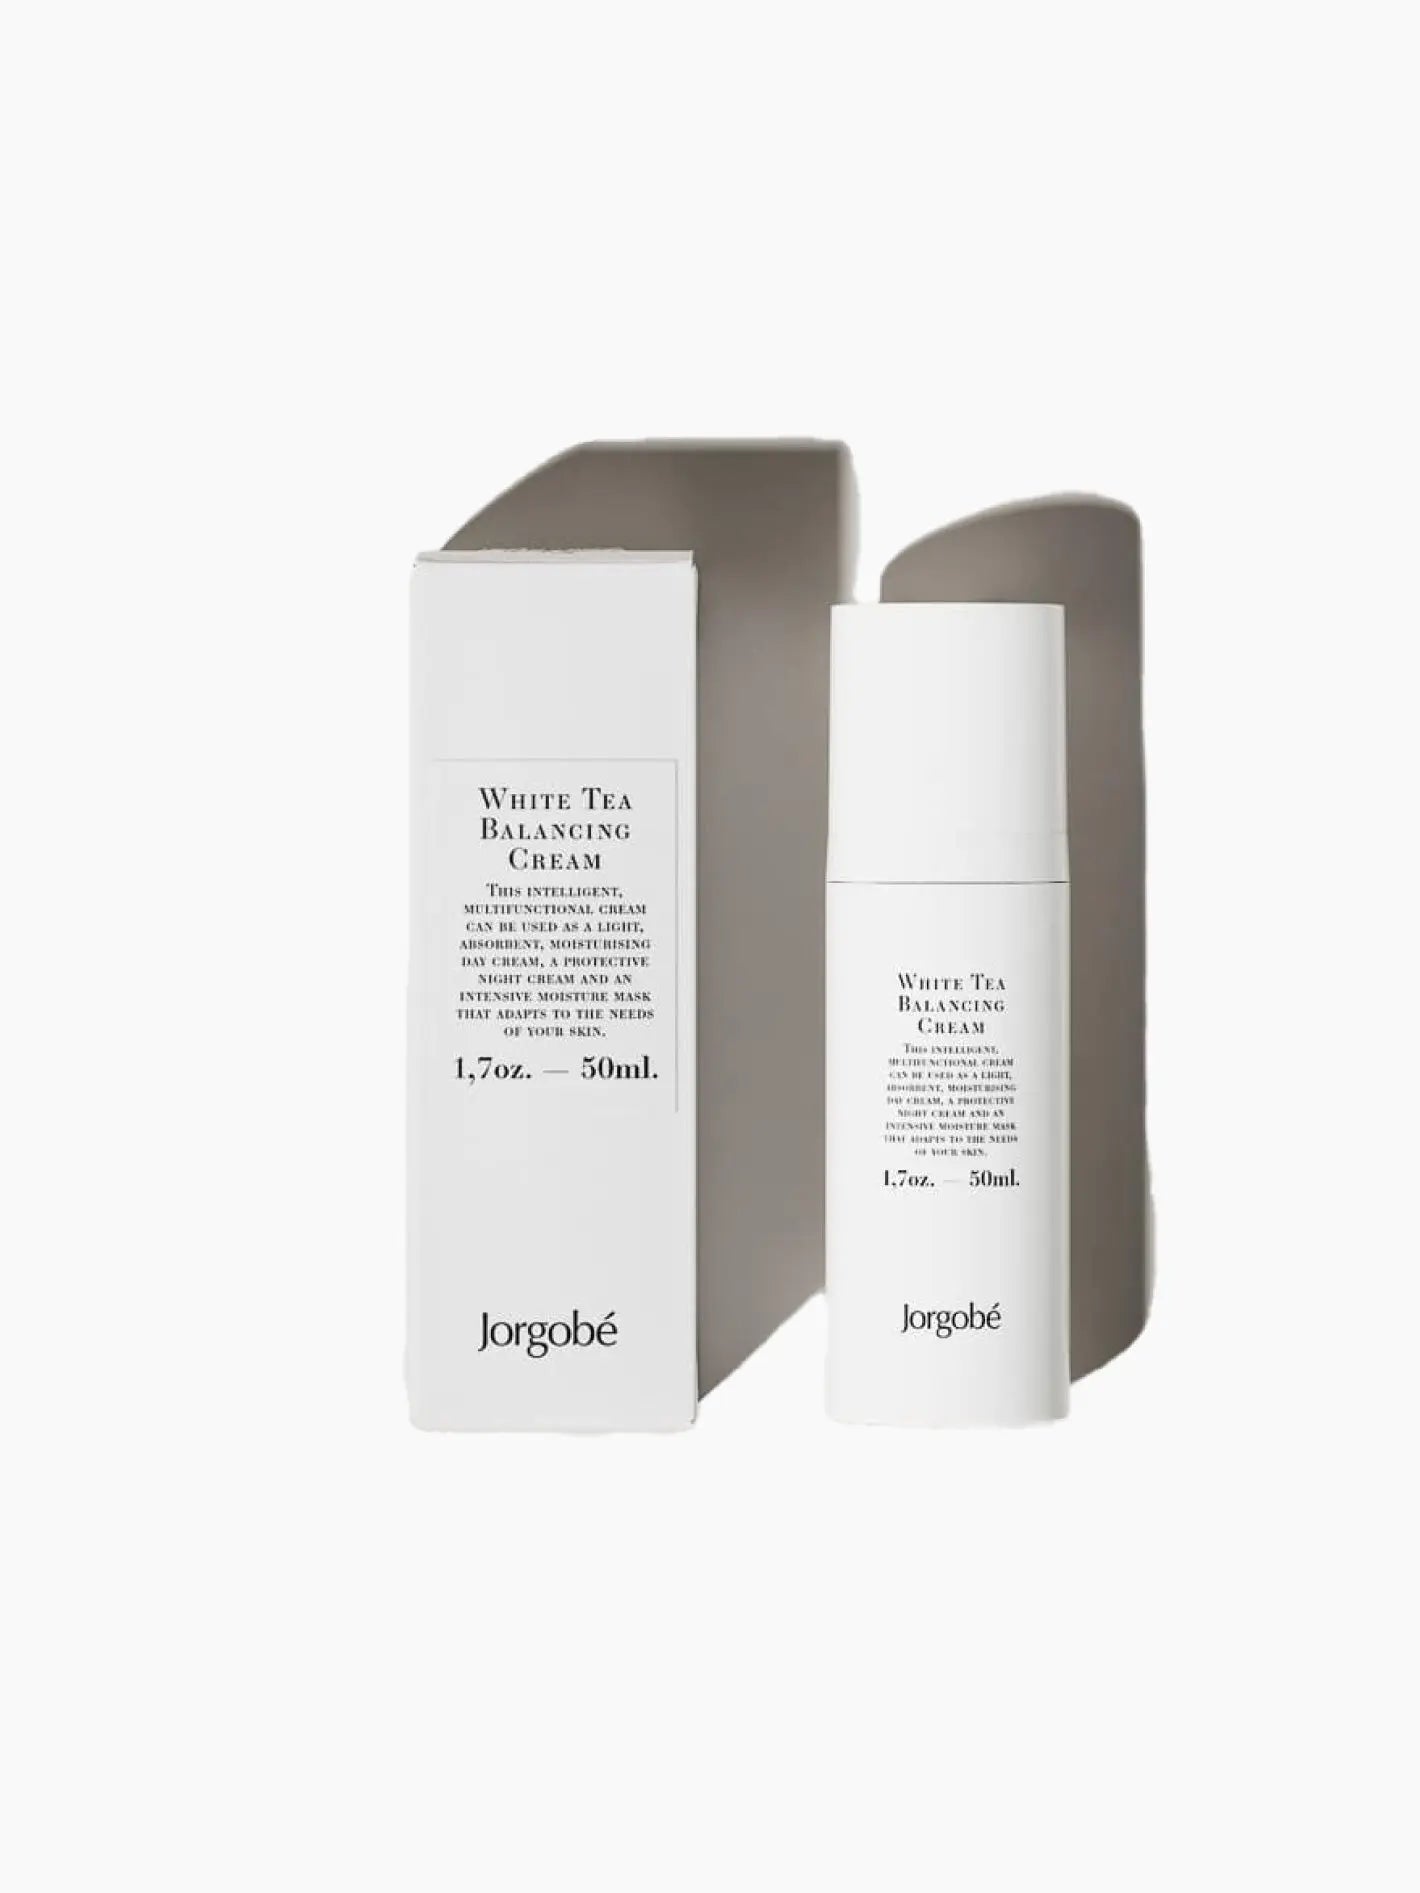 A white rectangular bottle labeled "White Tea Balancing Cream 50ml." stands next to its matching box, both branded with "Jorgobé" at the bottom. Available at Bassalstore in Barcelona, the text on both the bottle and box provides details about the product, which is 1.7 oz. or 50 ml in size.